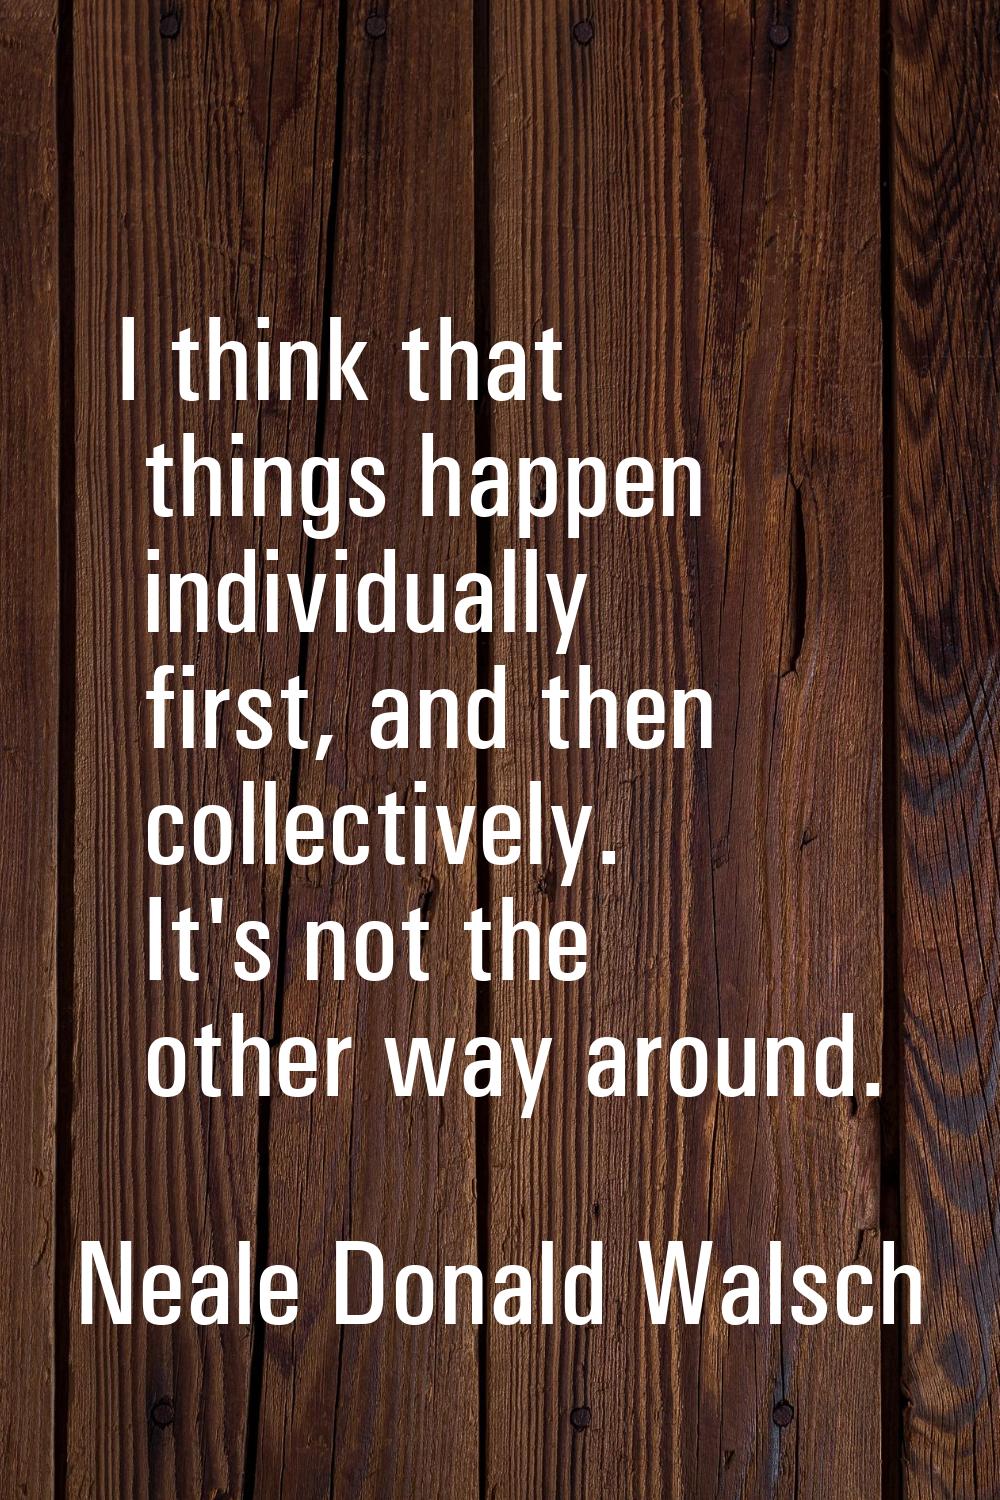 I think that things happen individually first, and then collectively. It's not the other way around